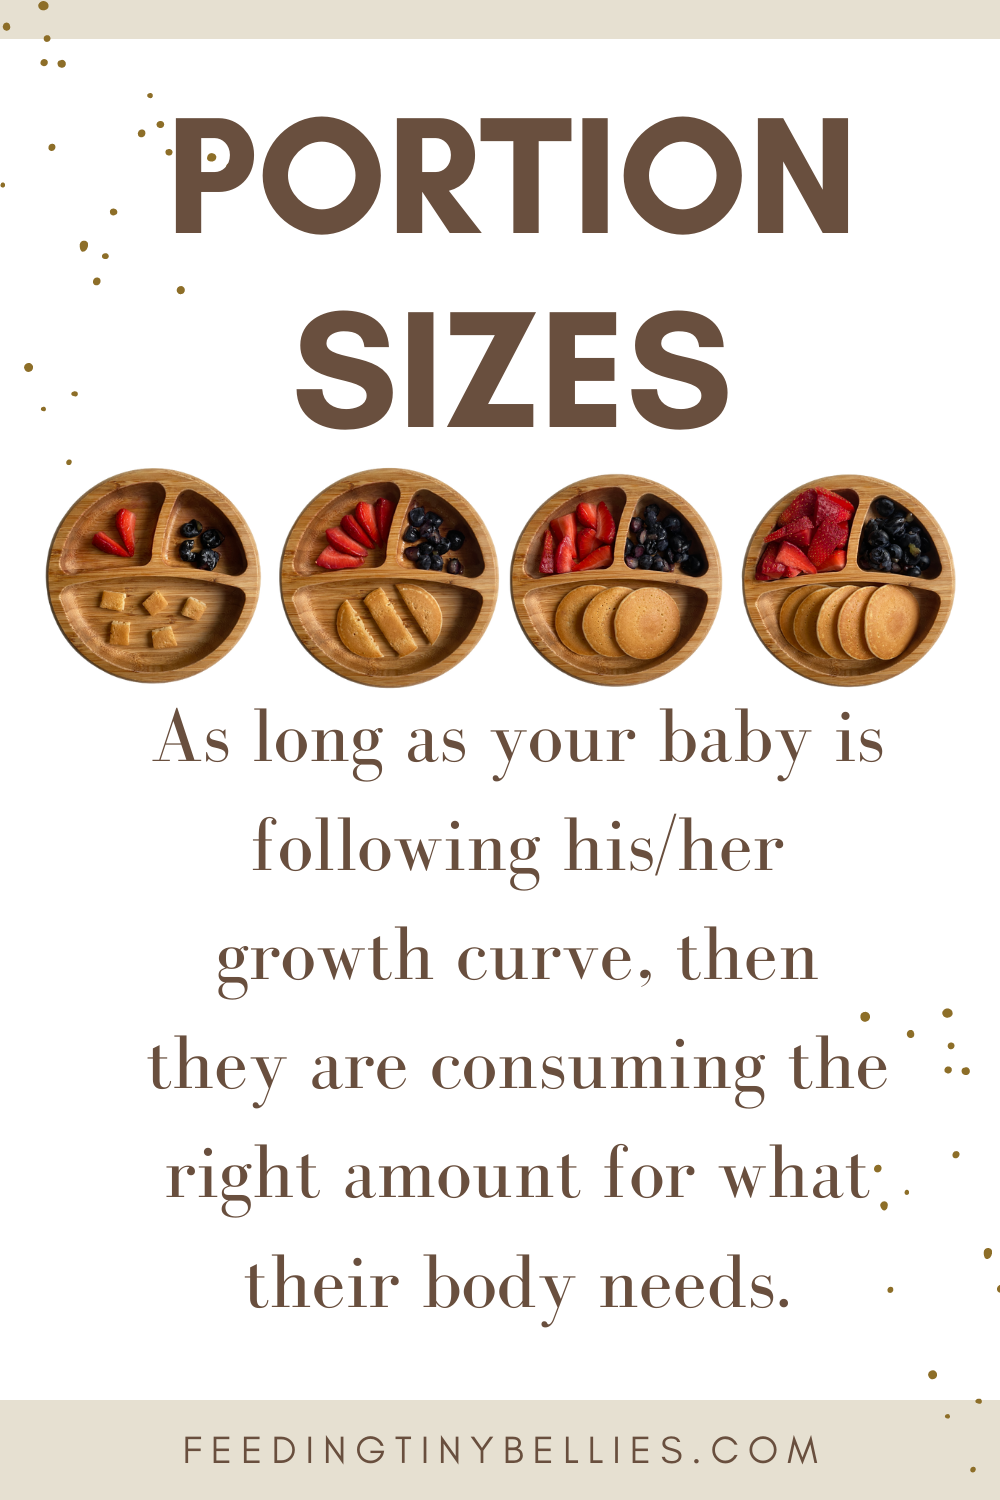 Portion sizes - As long as your baby is following his/her growth curve, then they are consuming the right amount for what their body needs.